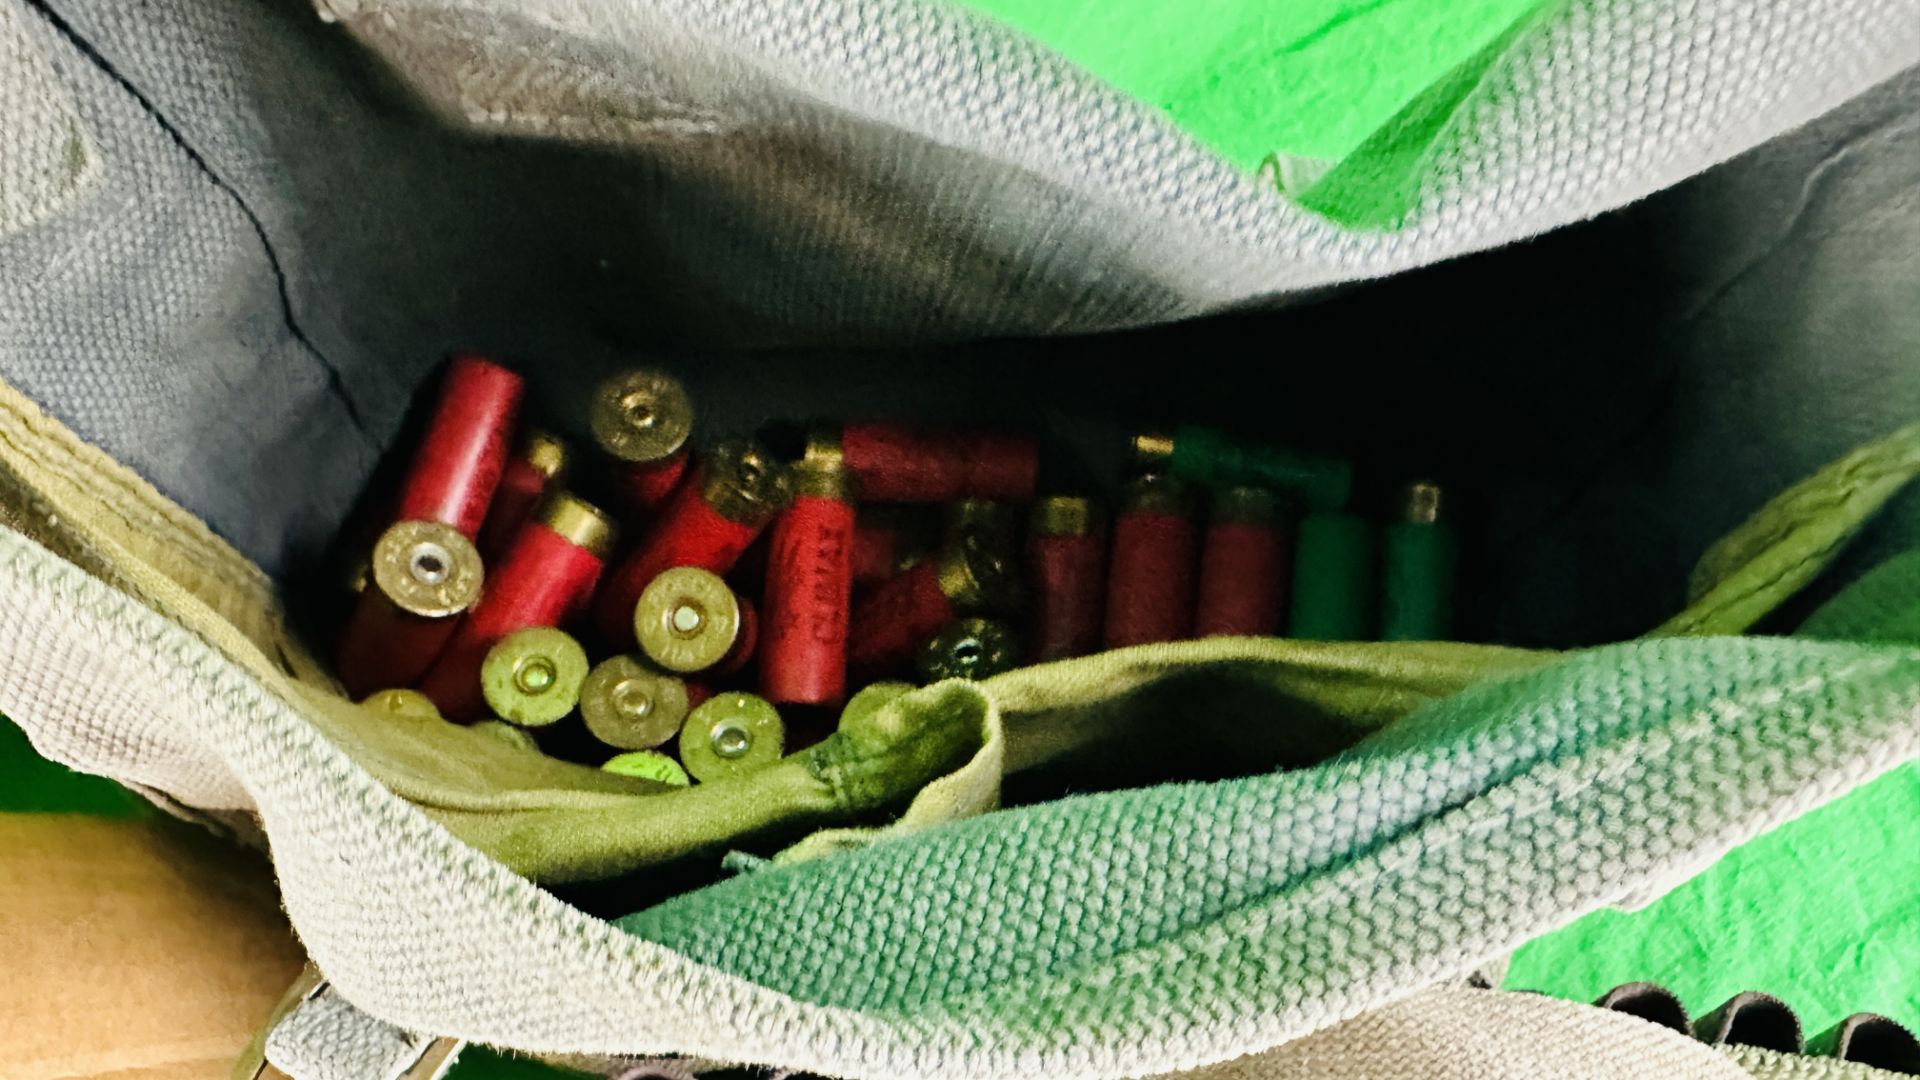 APPROX 214 MIXED 12 GAUGE CARTRIDGES + FERRET ALARM - (TO BE COLLECTED IN PERSON BY LICENCE HOLDER - Image 3 of 5